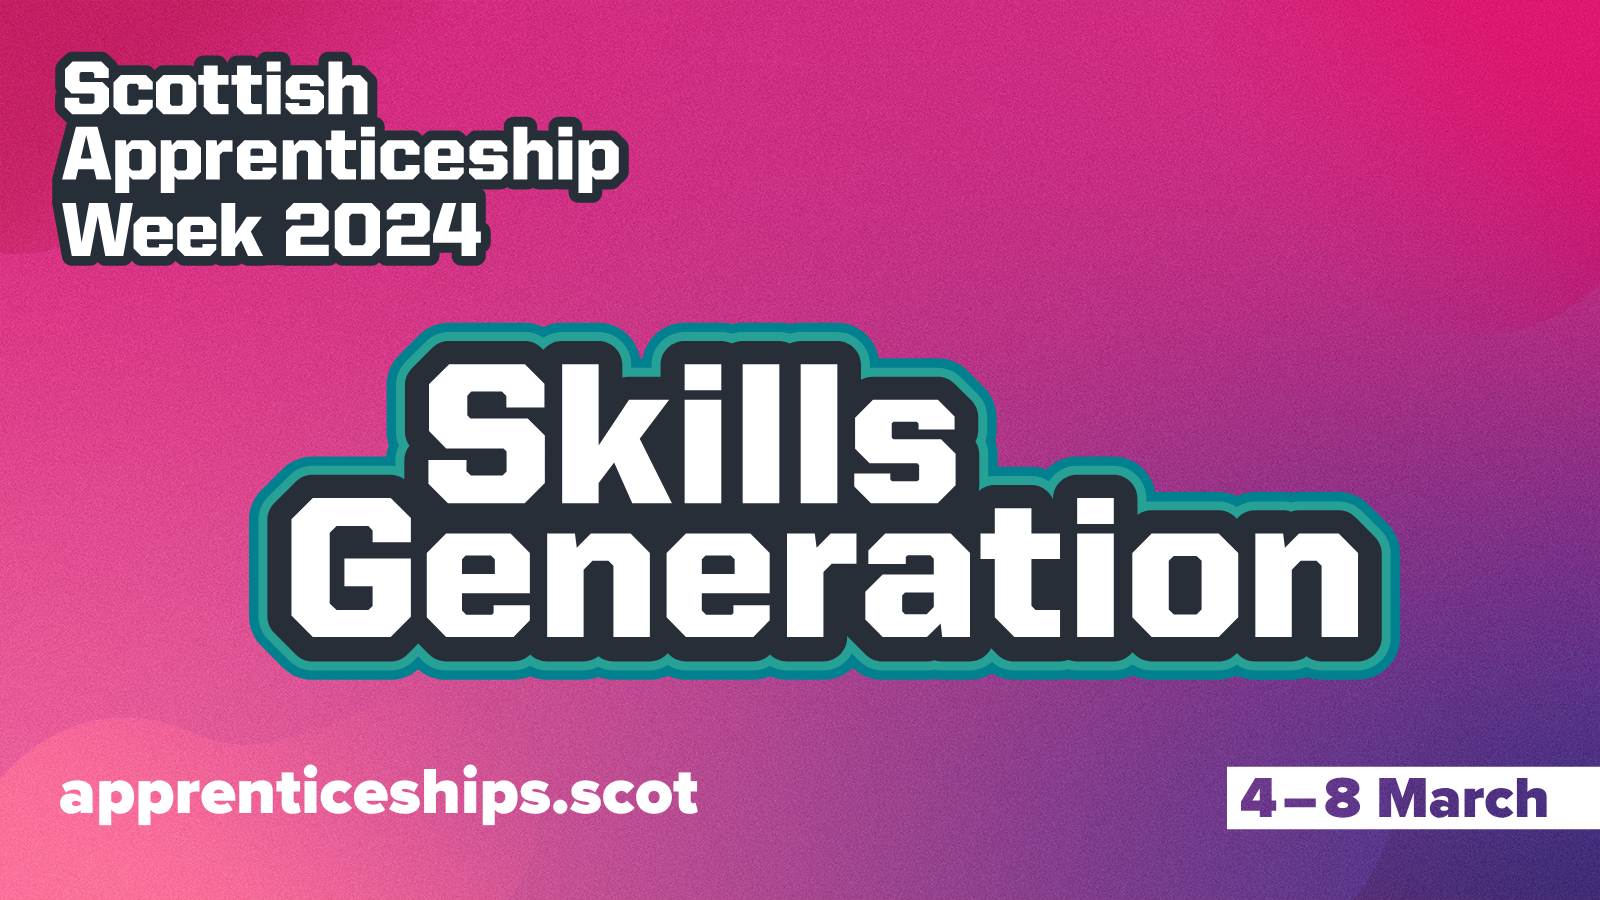 Events for all during Scottish Apprenticeship Week